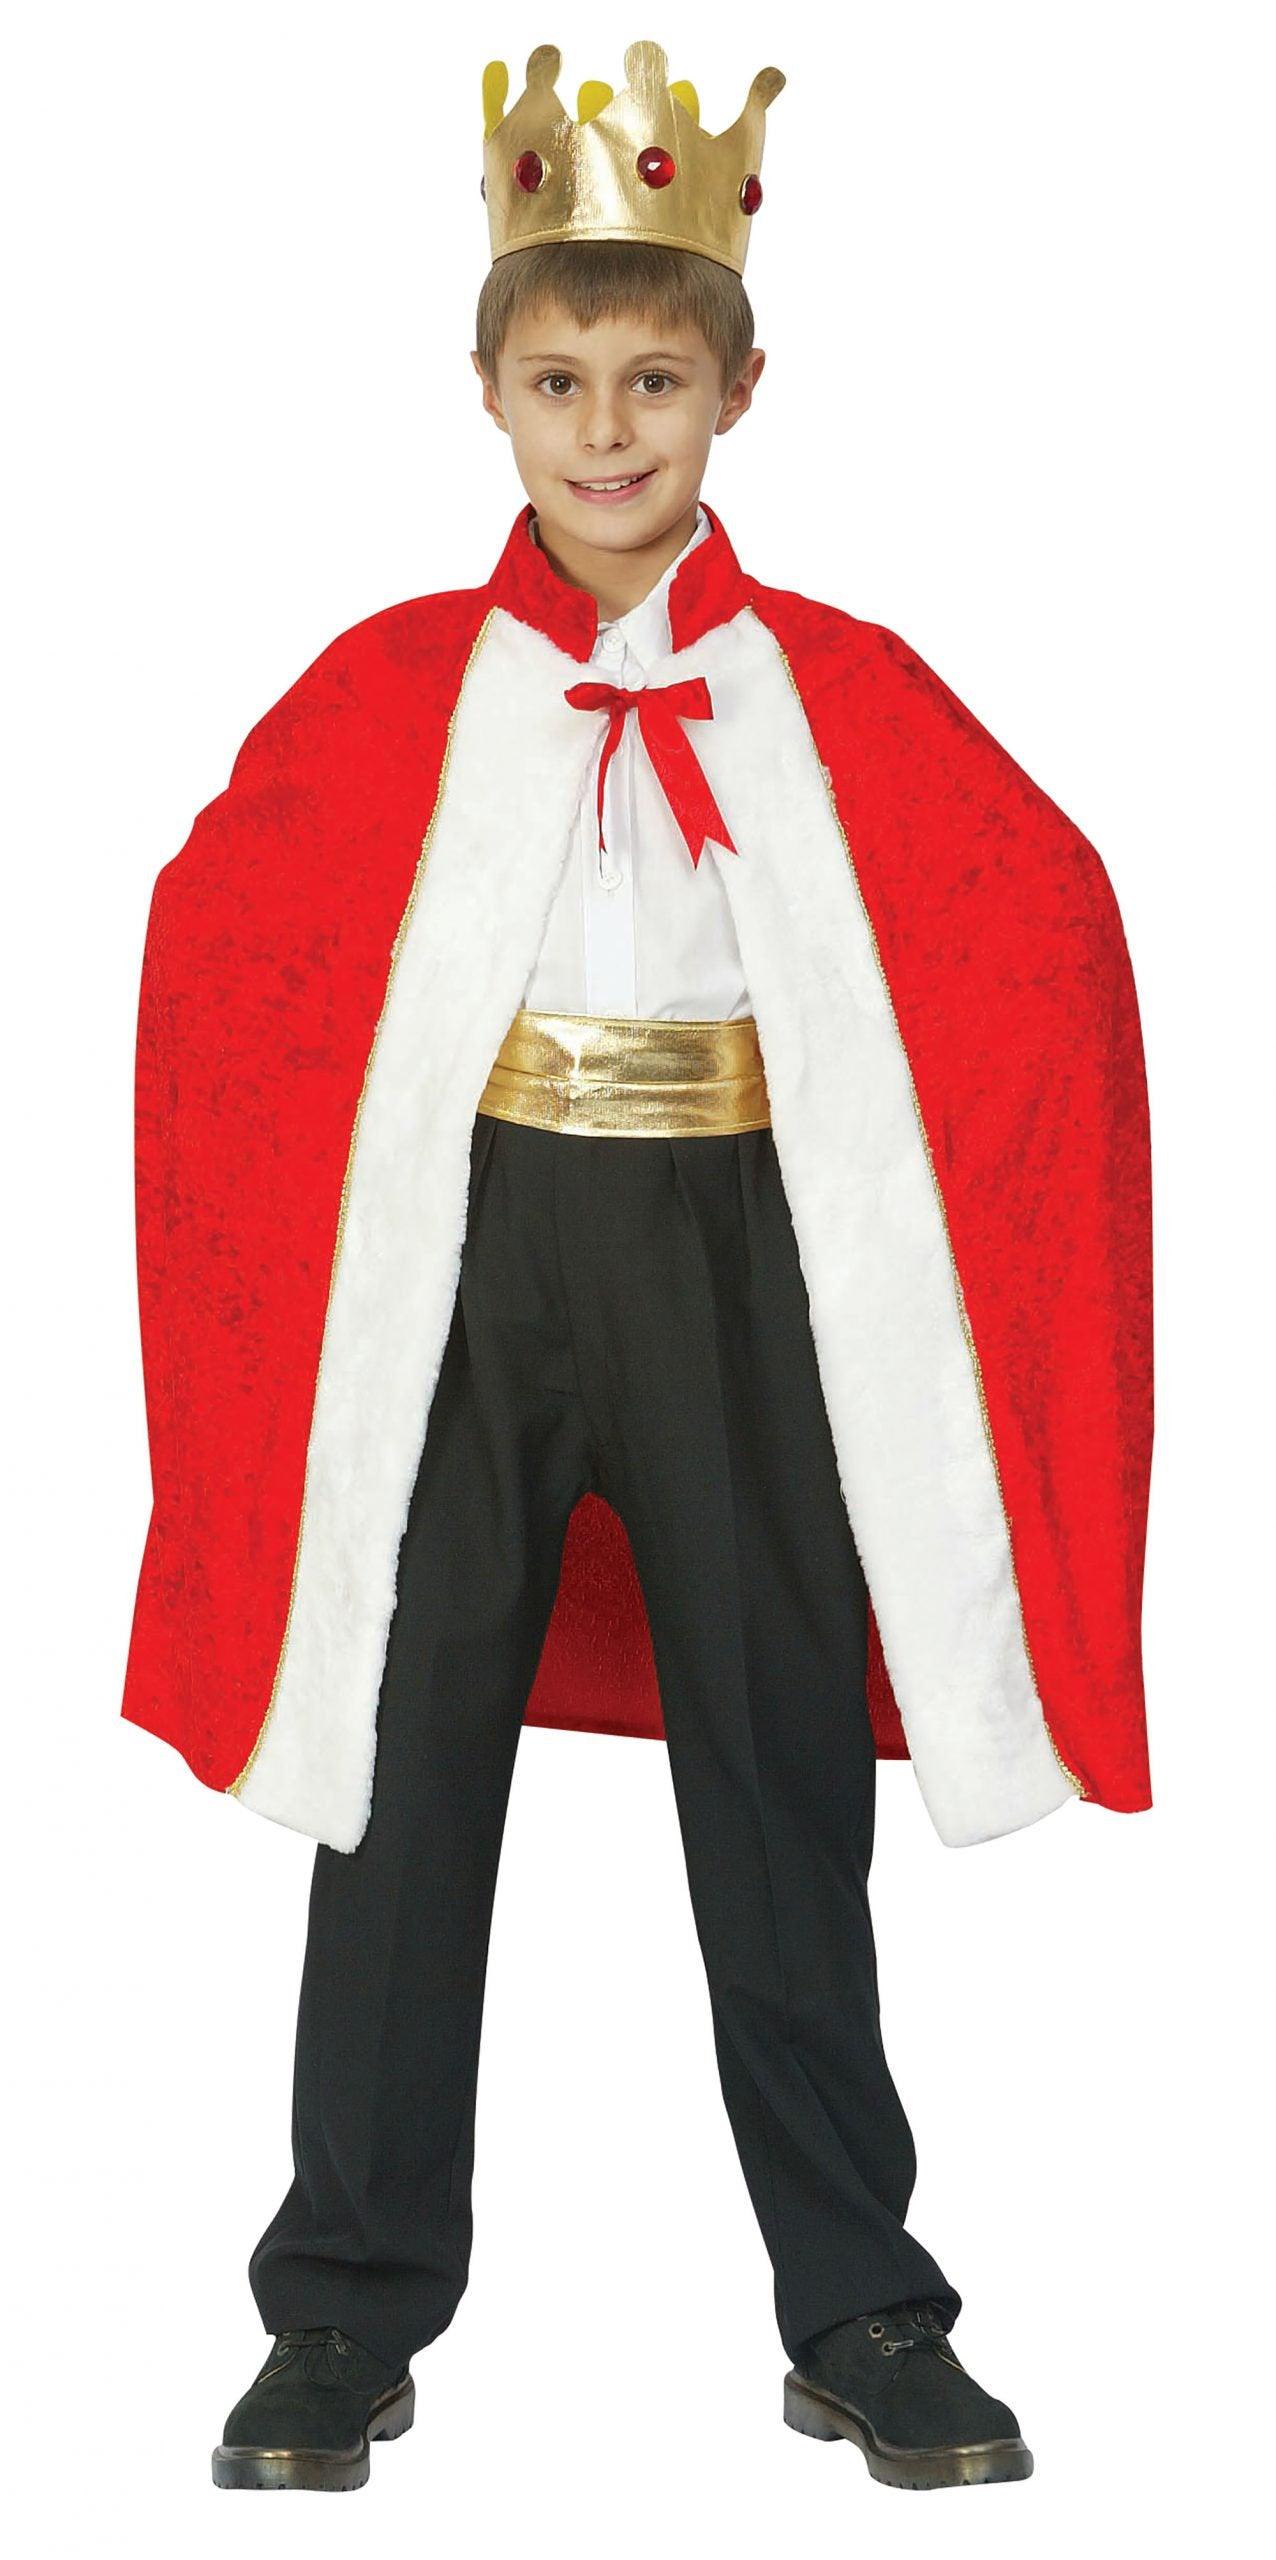 Buy ITSMYCOSTUME English King Indian State Kids Fancy Dress Costume 2-3  Years Online at Low Prices in India - Amazon.in